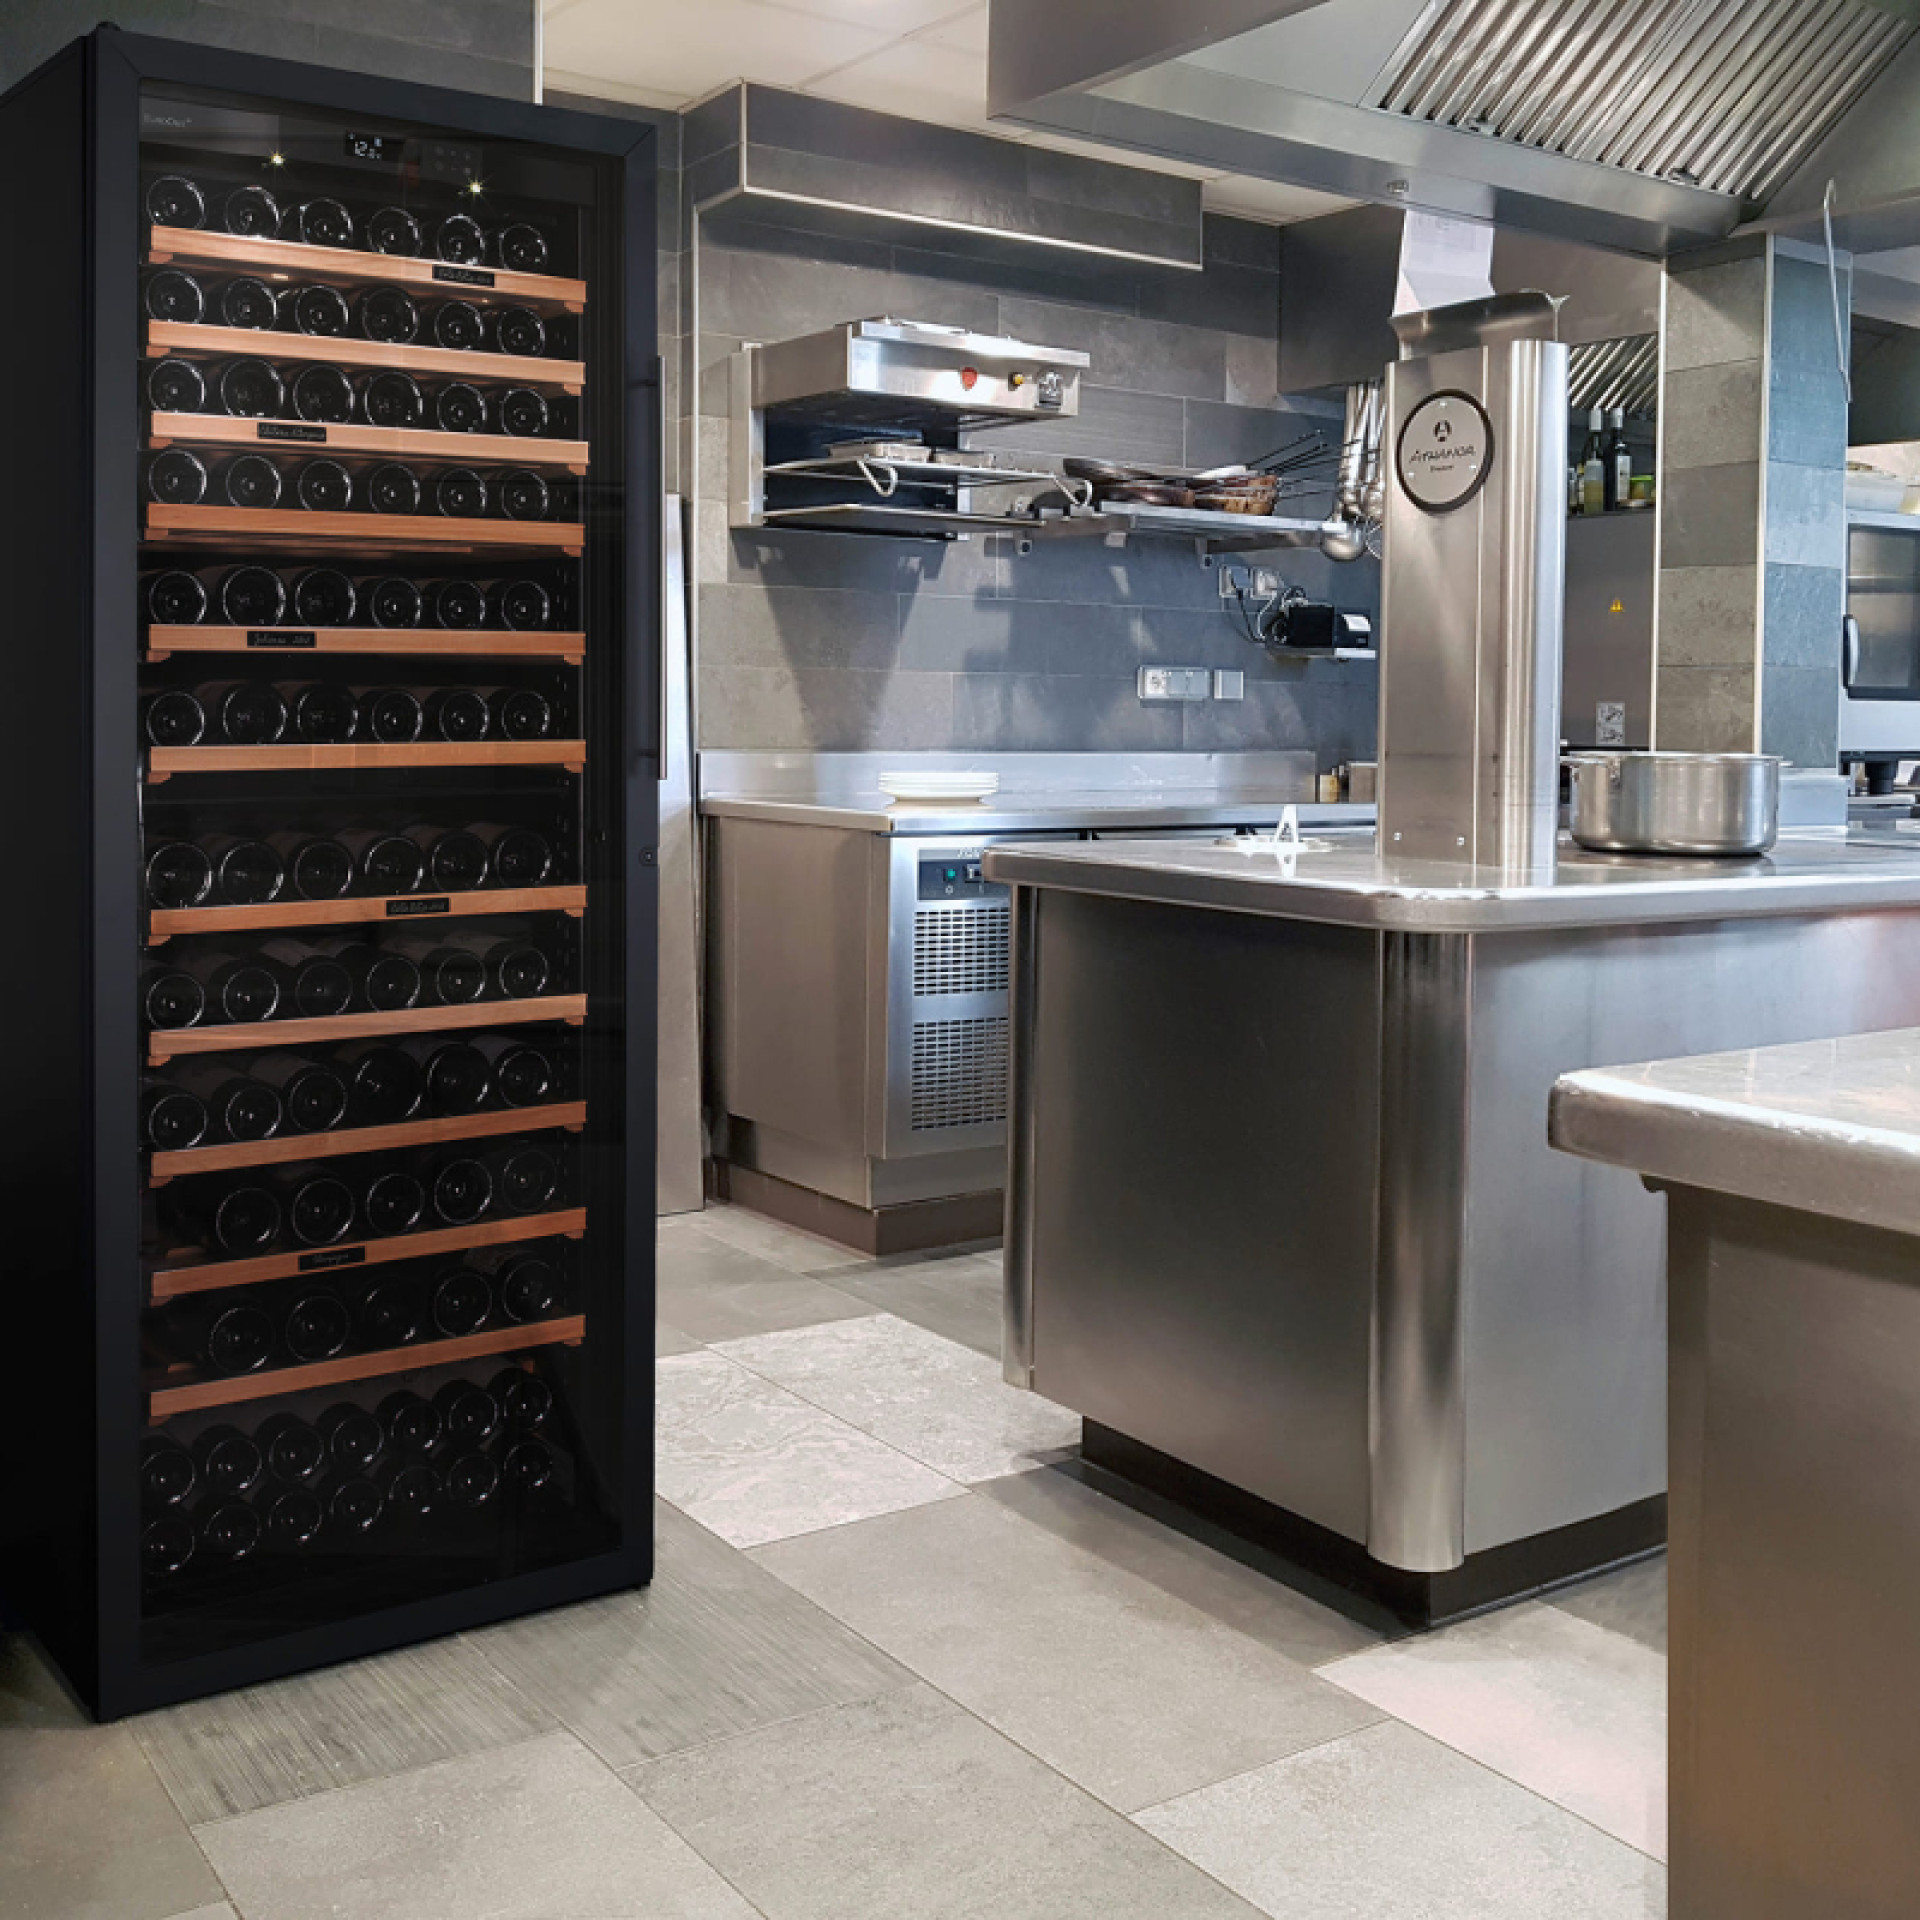 Installed in the kitchen or in the pantry, servers have quick access to the bottles stored in this wine cooler equipped with very functional sliding shelves.